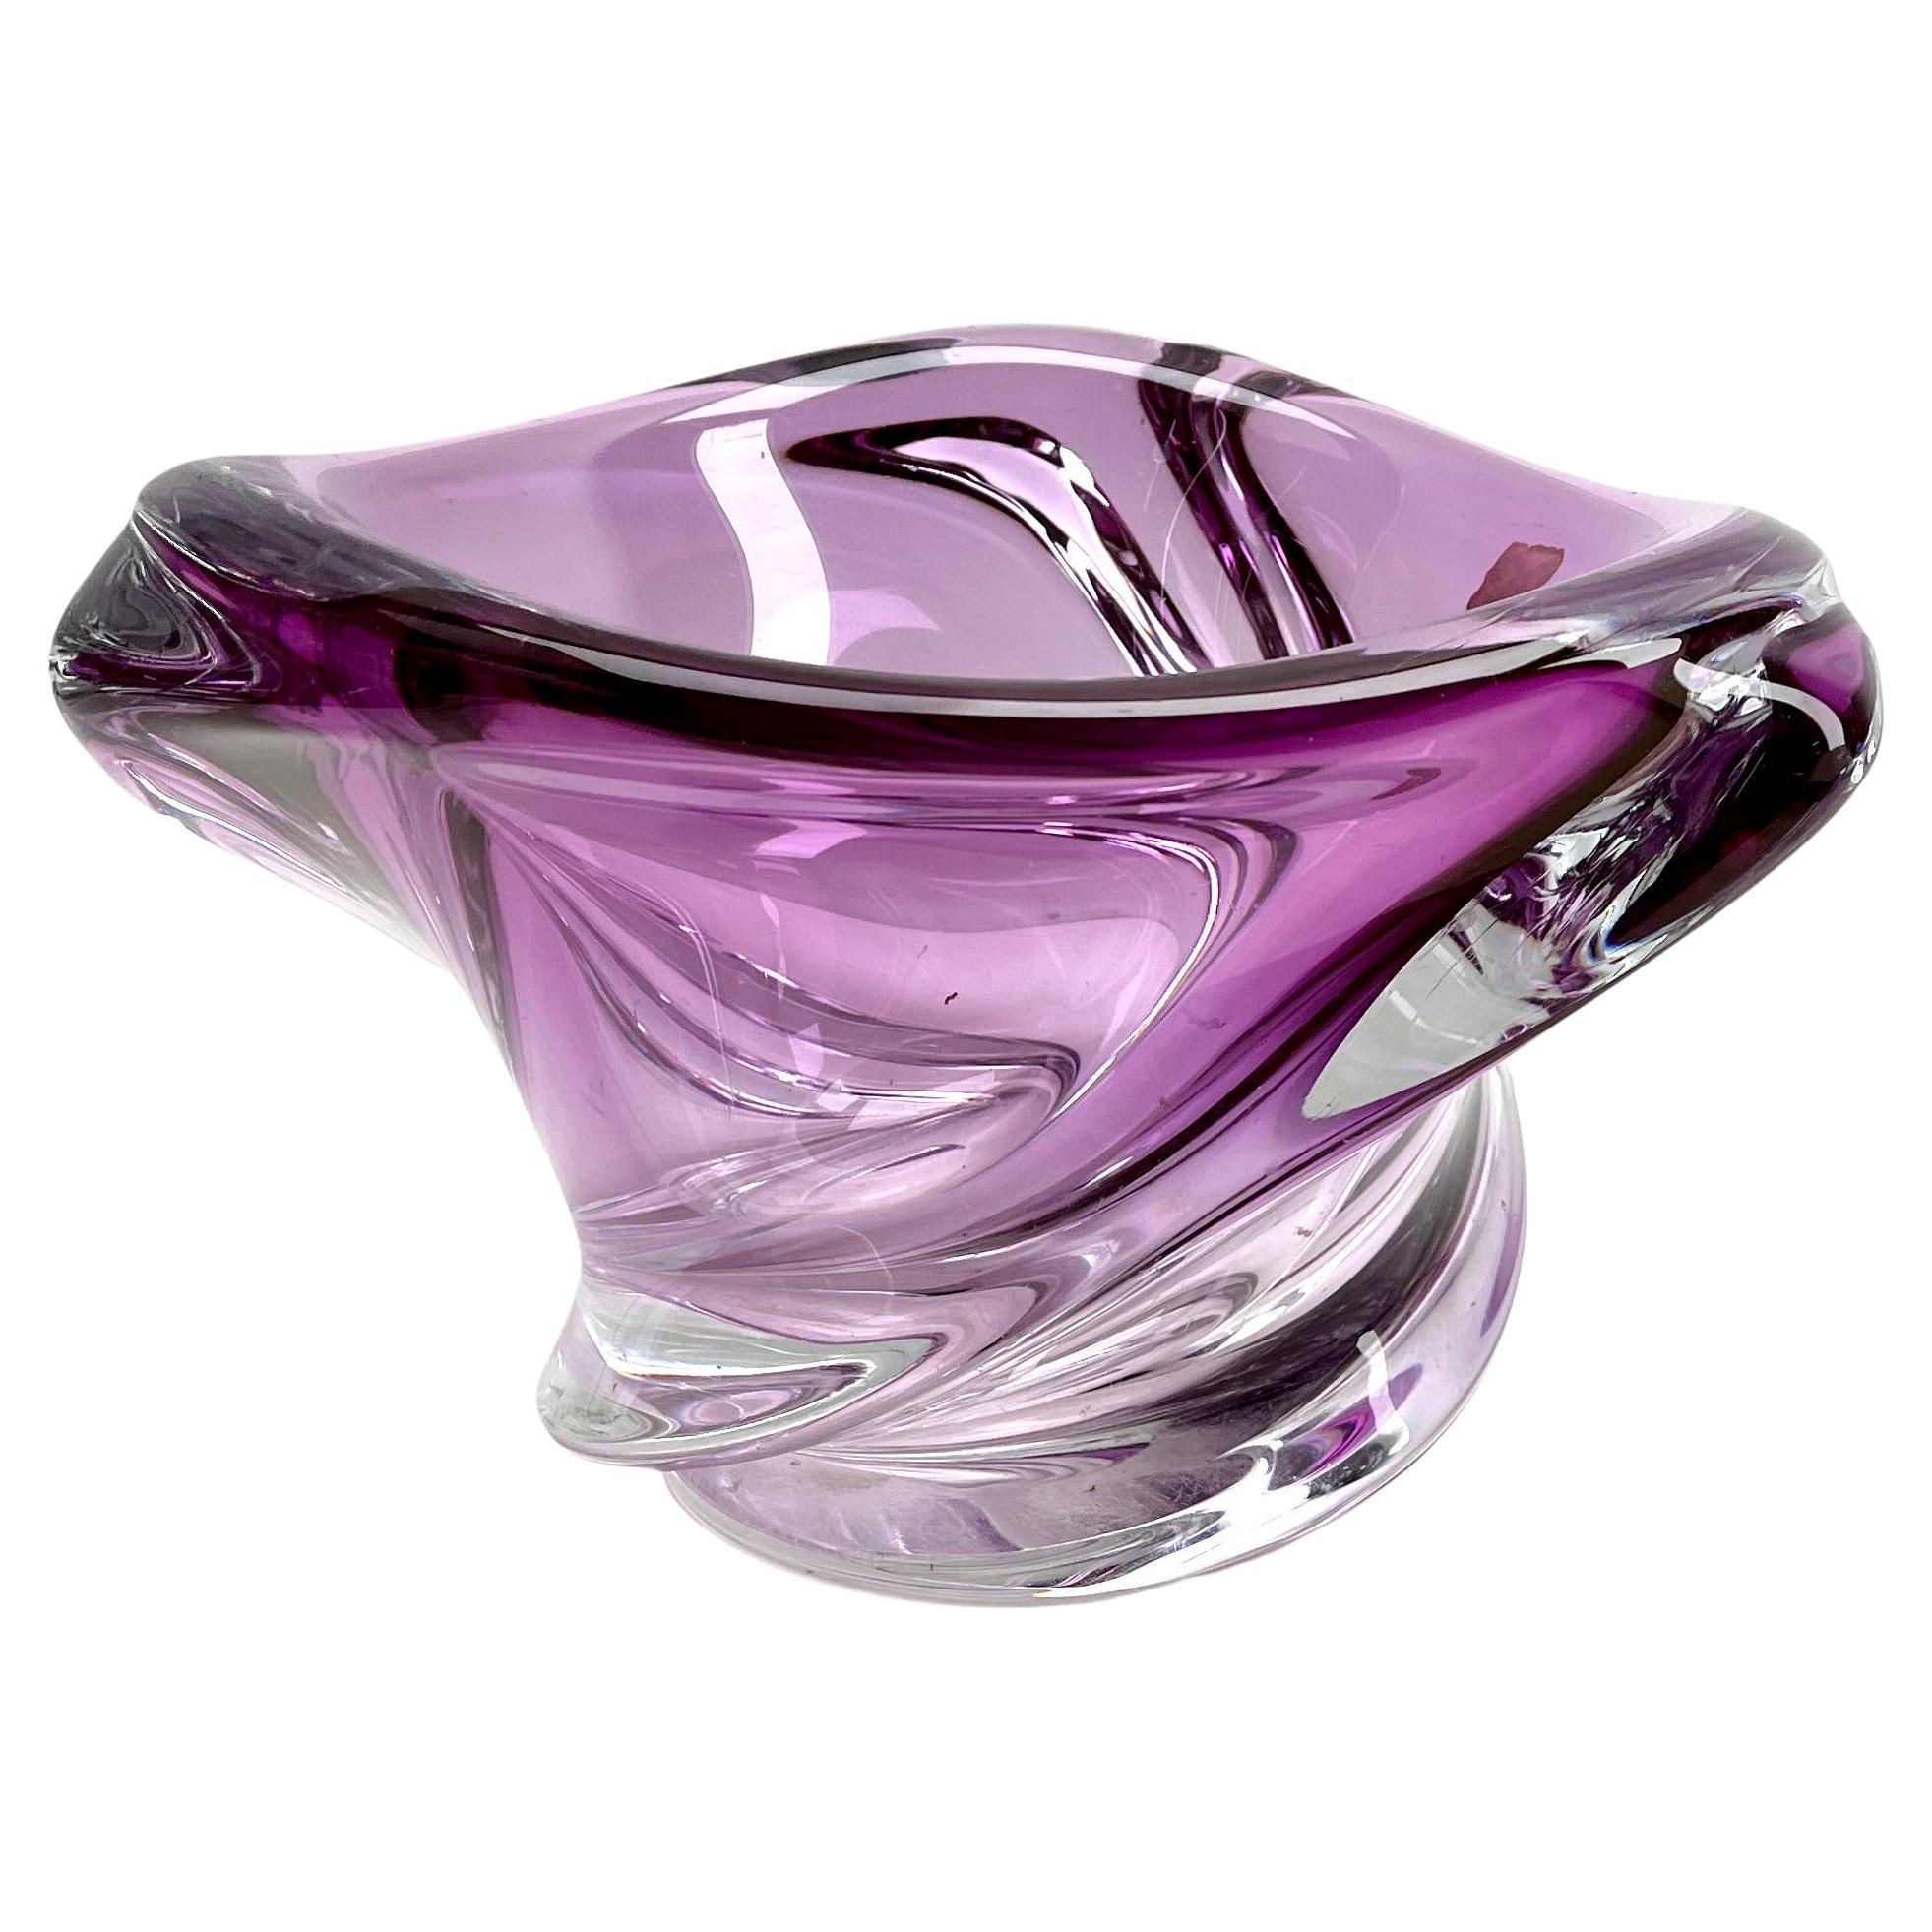 Hand-Crafted Val Saint Lambert Signed Sculpted Crystal Vase with Sommerso Core, Belgium For Sale